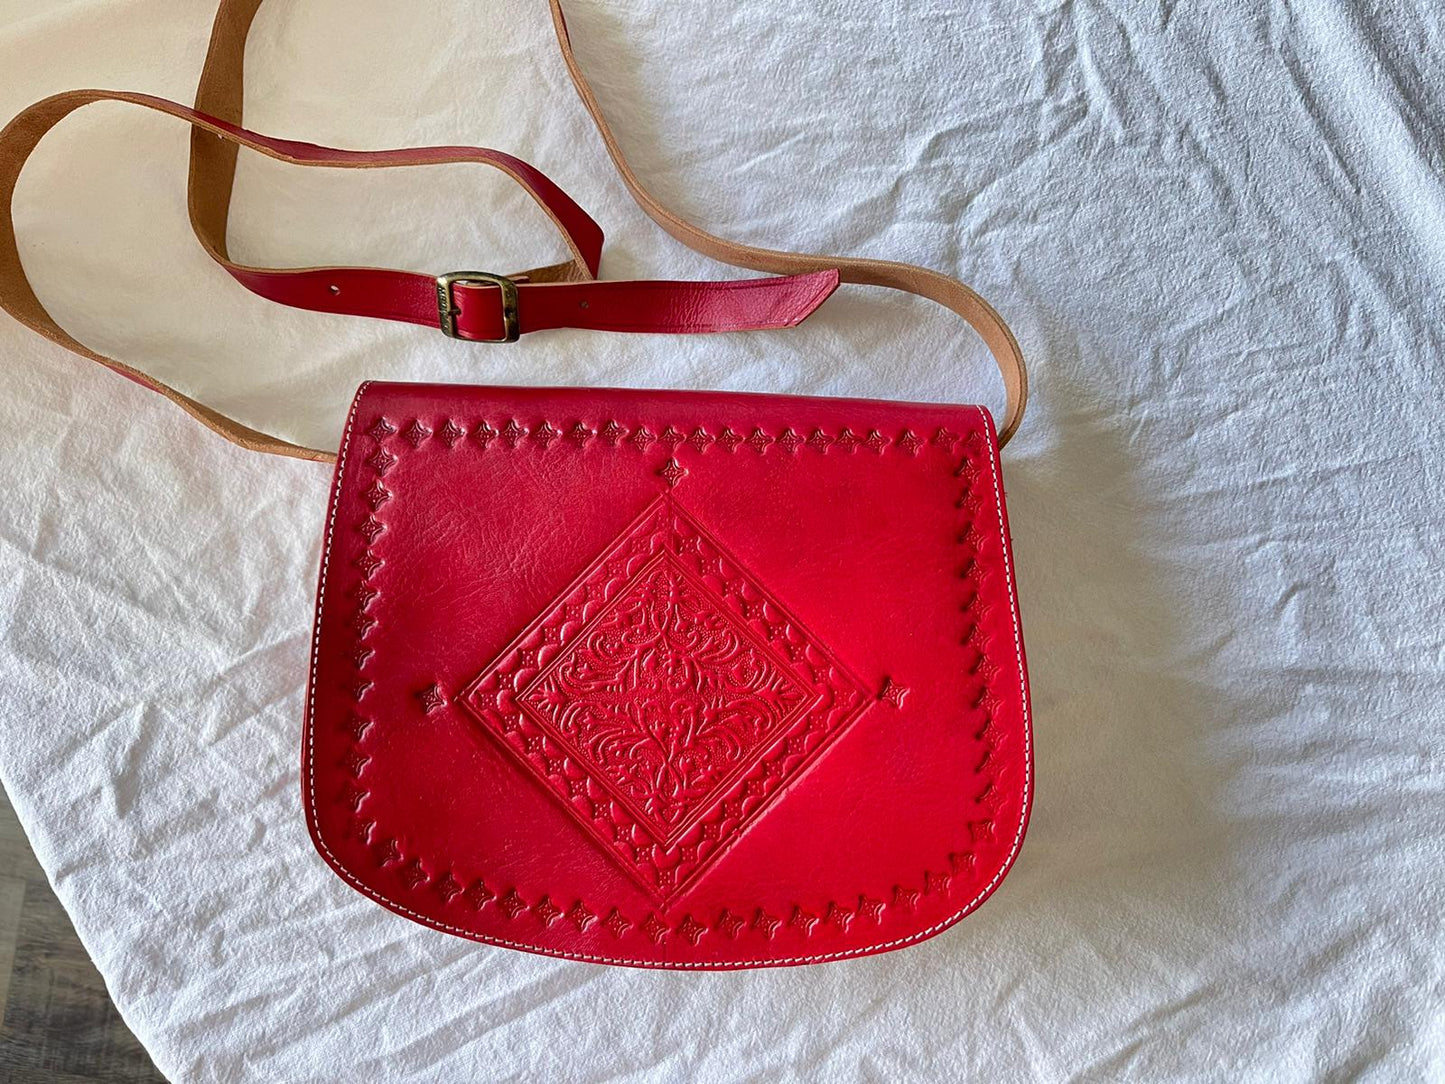 leather bag - red